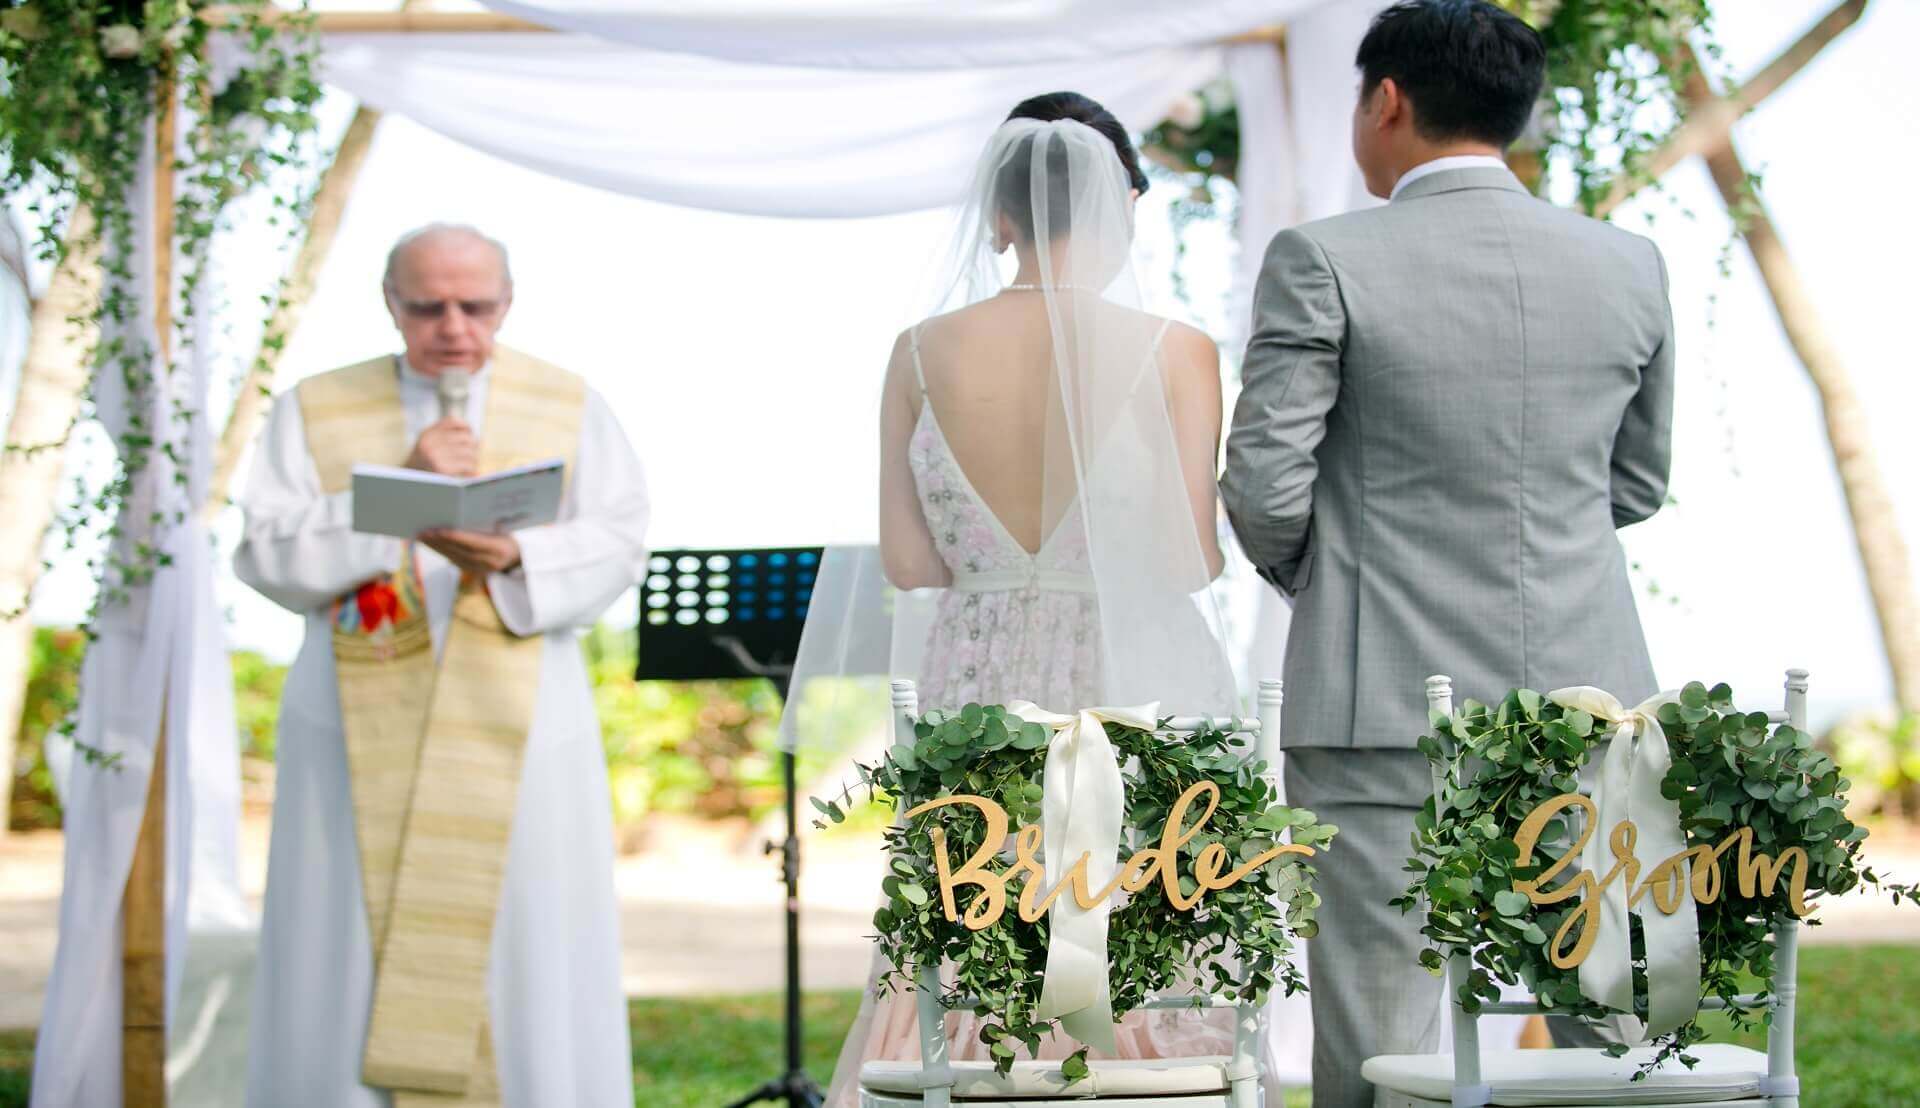 Sugar & Spice Events - Bride and groom exchange vow at garden by the beach wedding ceremony at Rasa Sayang Resort